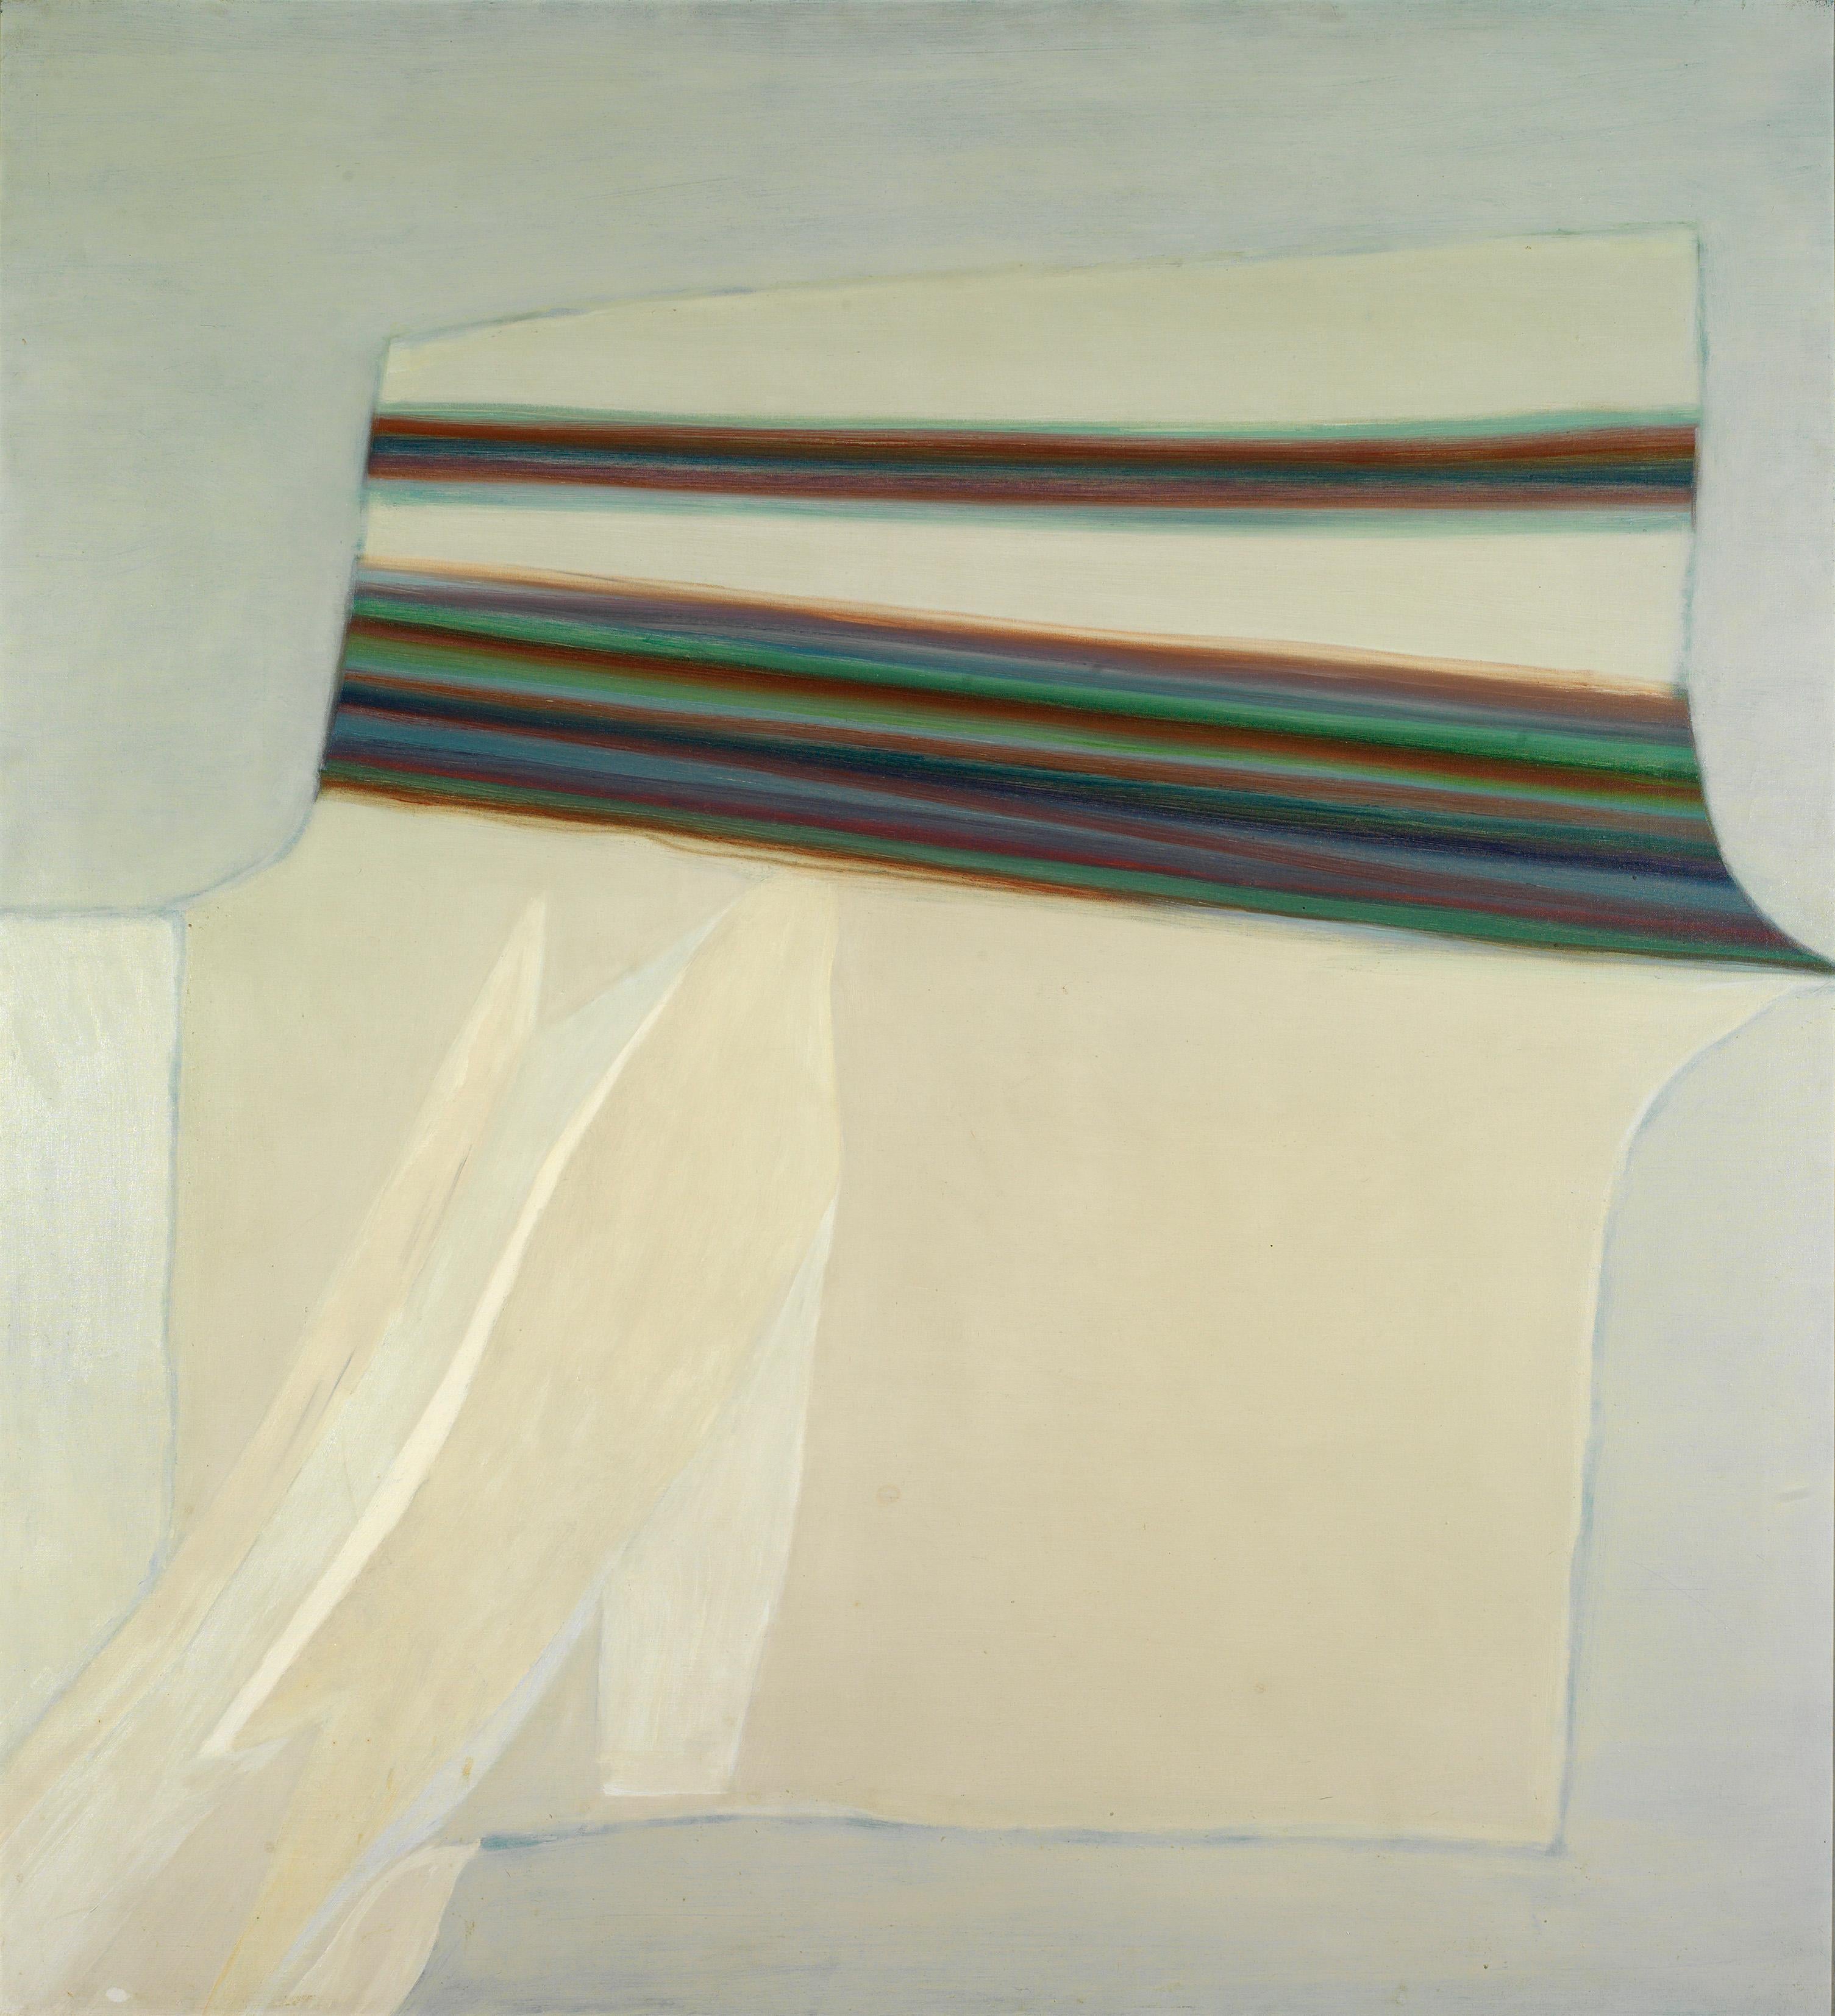 Untitled 2 - 20th Century, Oil on canvas by Prunella Clough